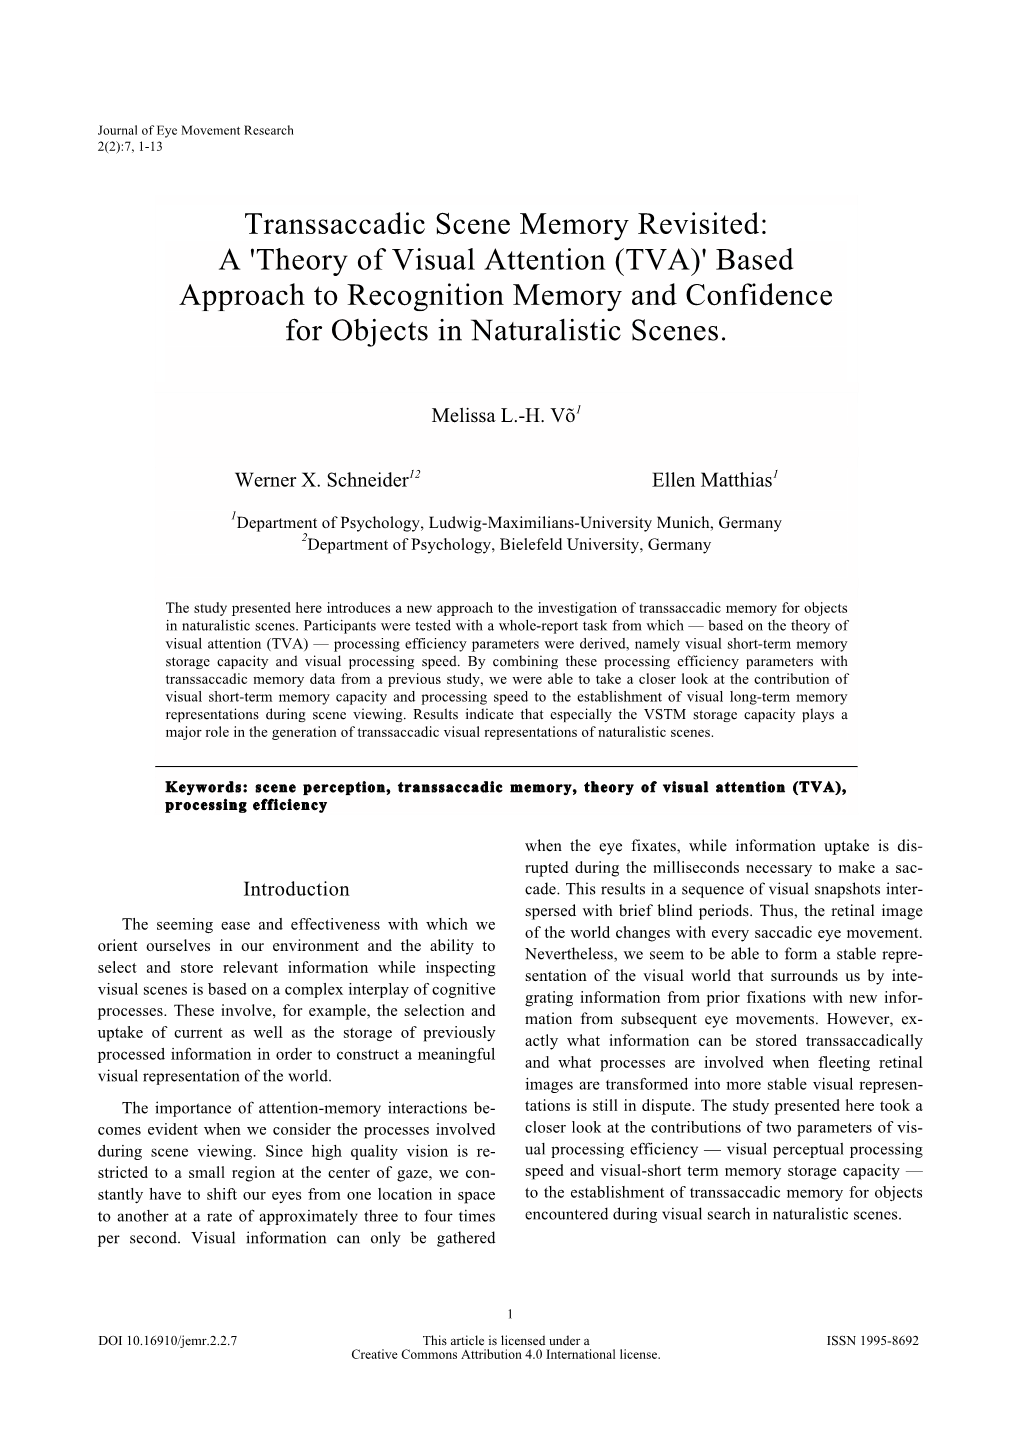 Transsaccadic Scene Memory Revisited: a 'Theory of Visual Attention (TVA)' Based Approach to Recognition Memory and Confidence for Objects in Naturalistic Scenes